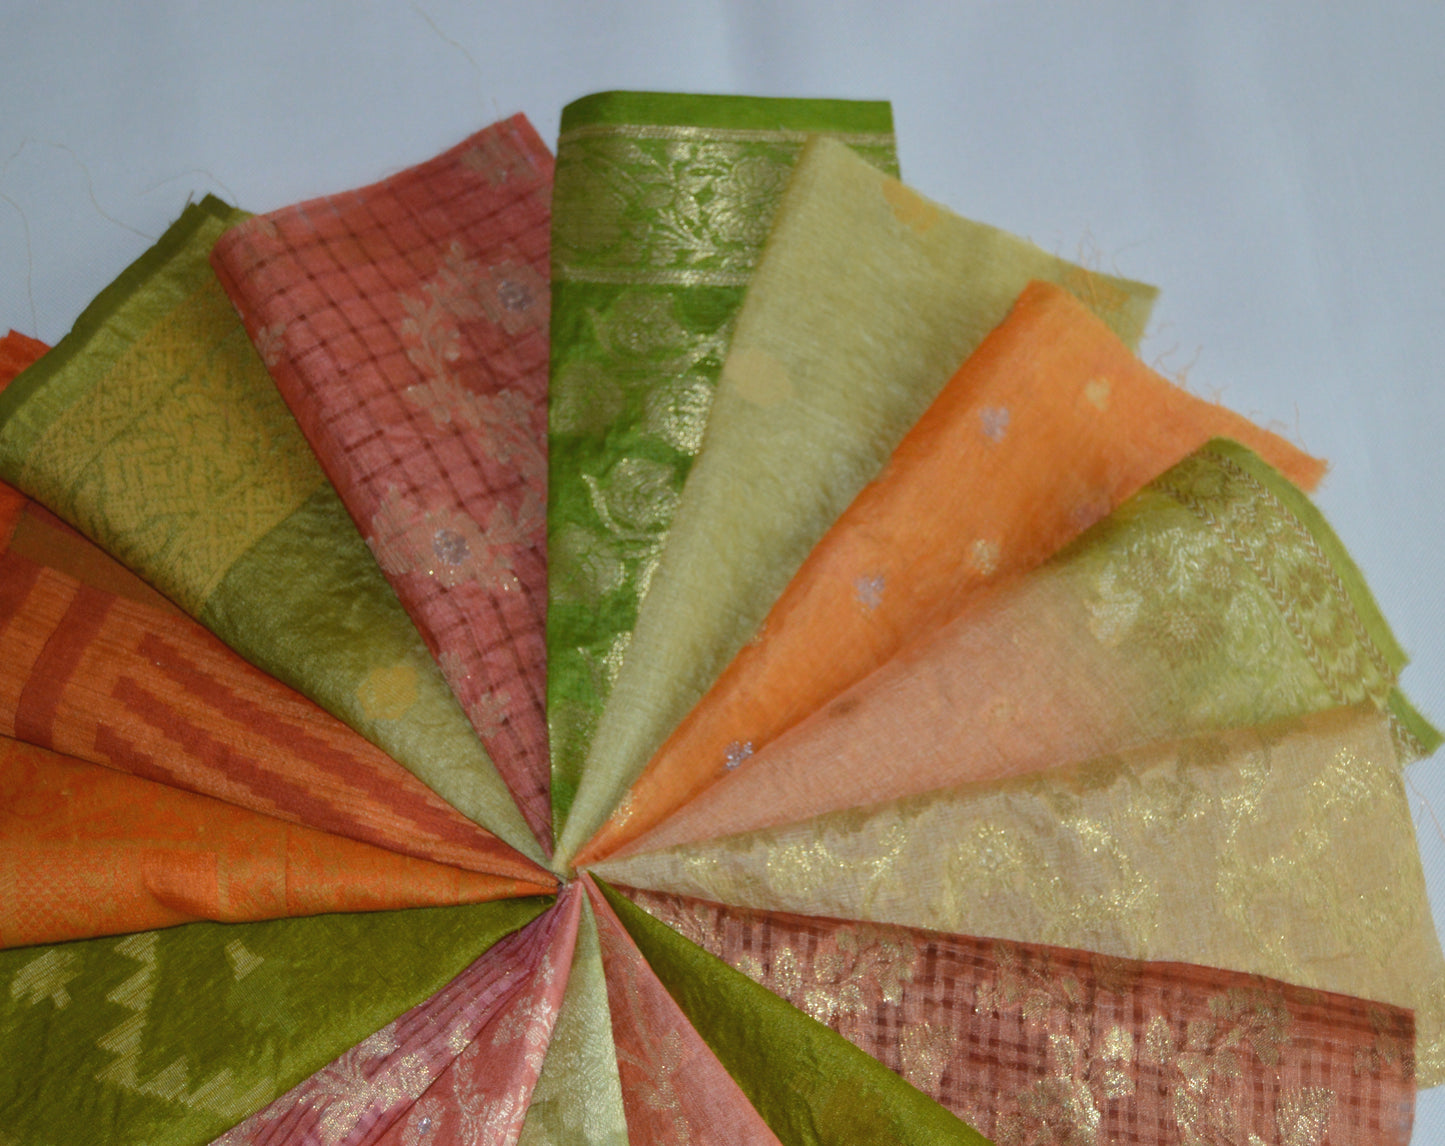 8 Inch x 16 Pieces Orange Green Recycled Vintage Sari Scraps Craft Fabric Card Making Collage Mixed Media Textile Art Sewing Junk Journals